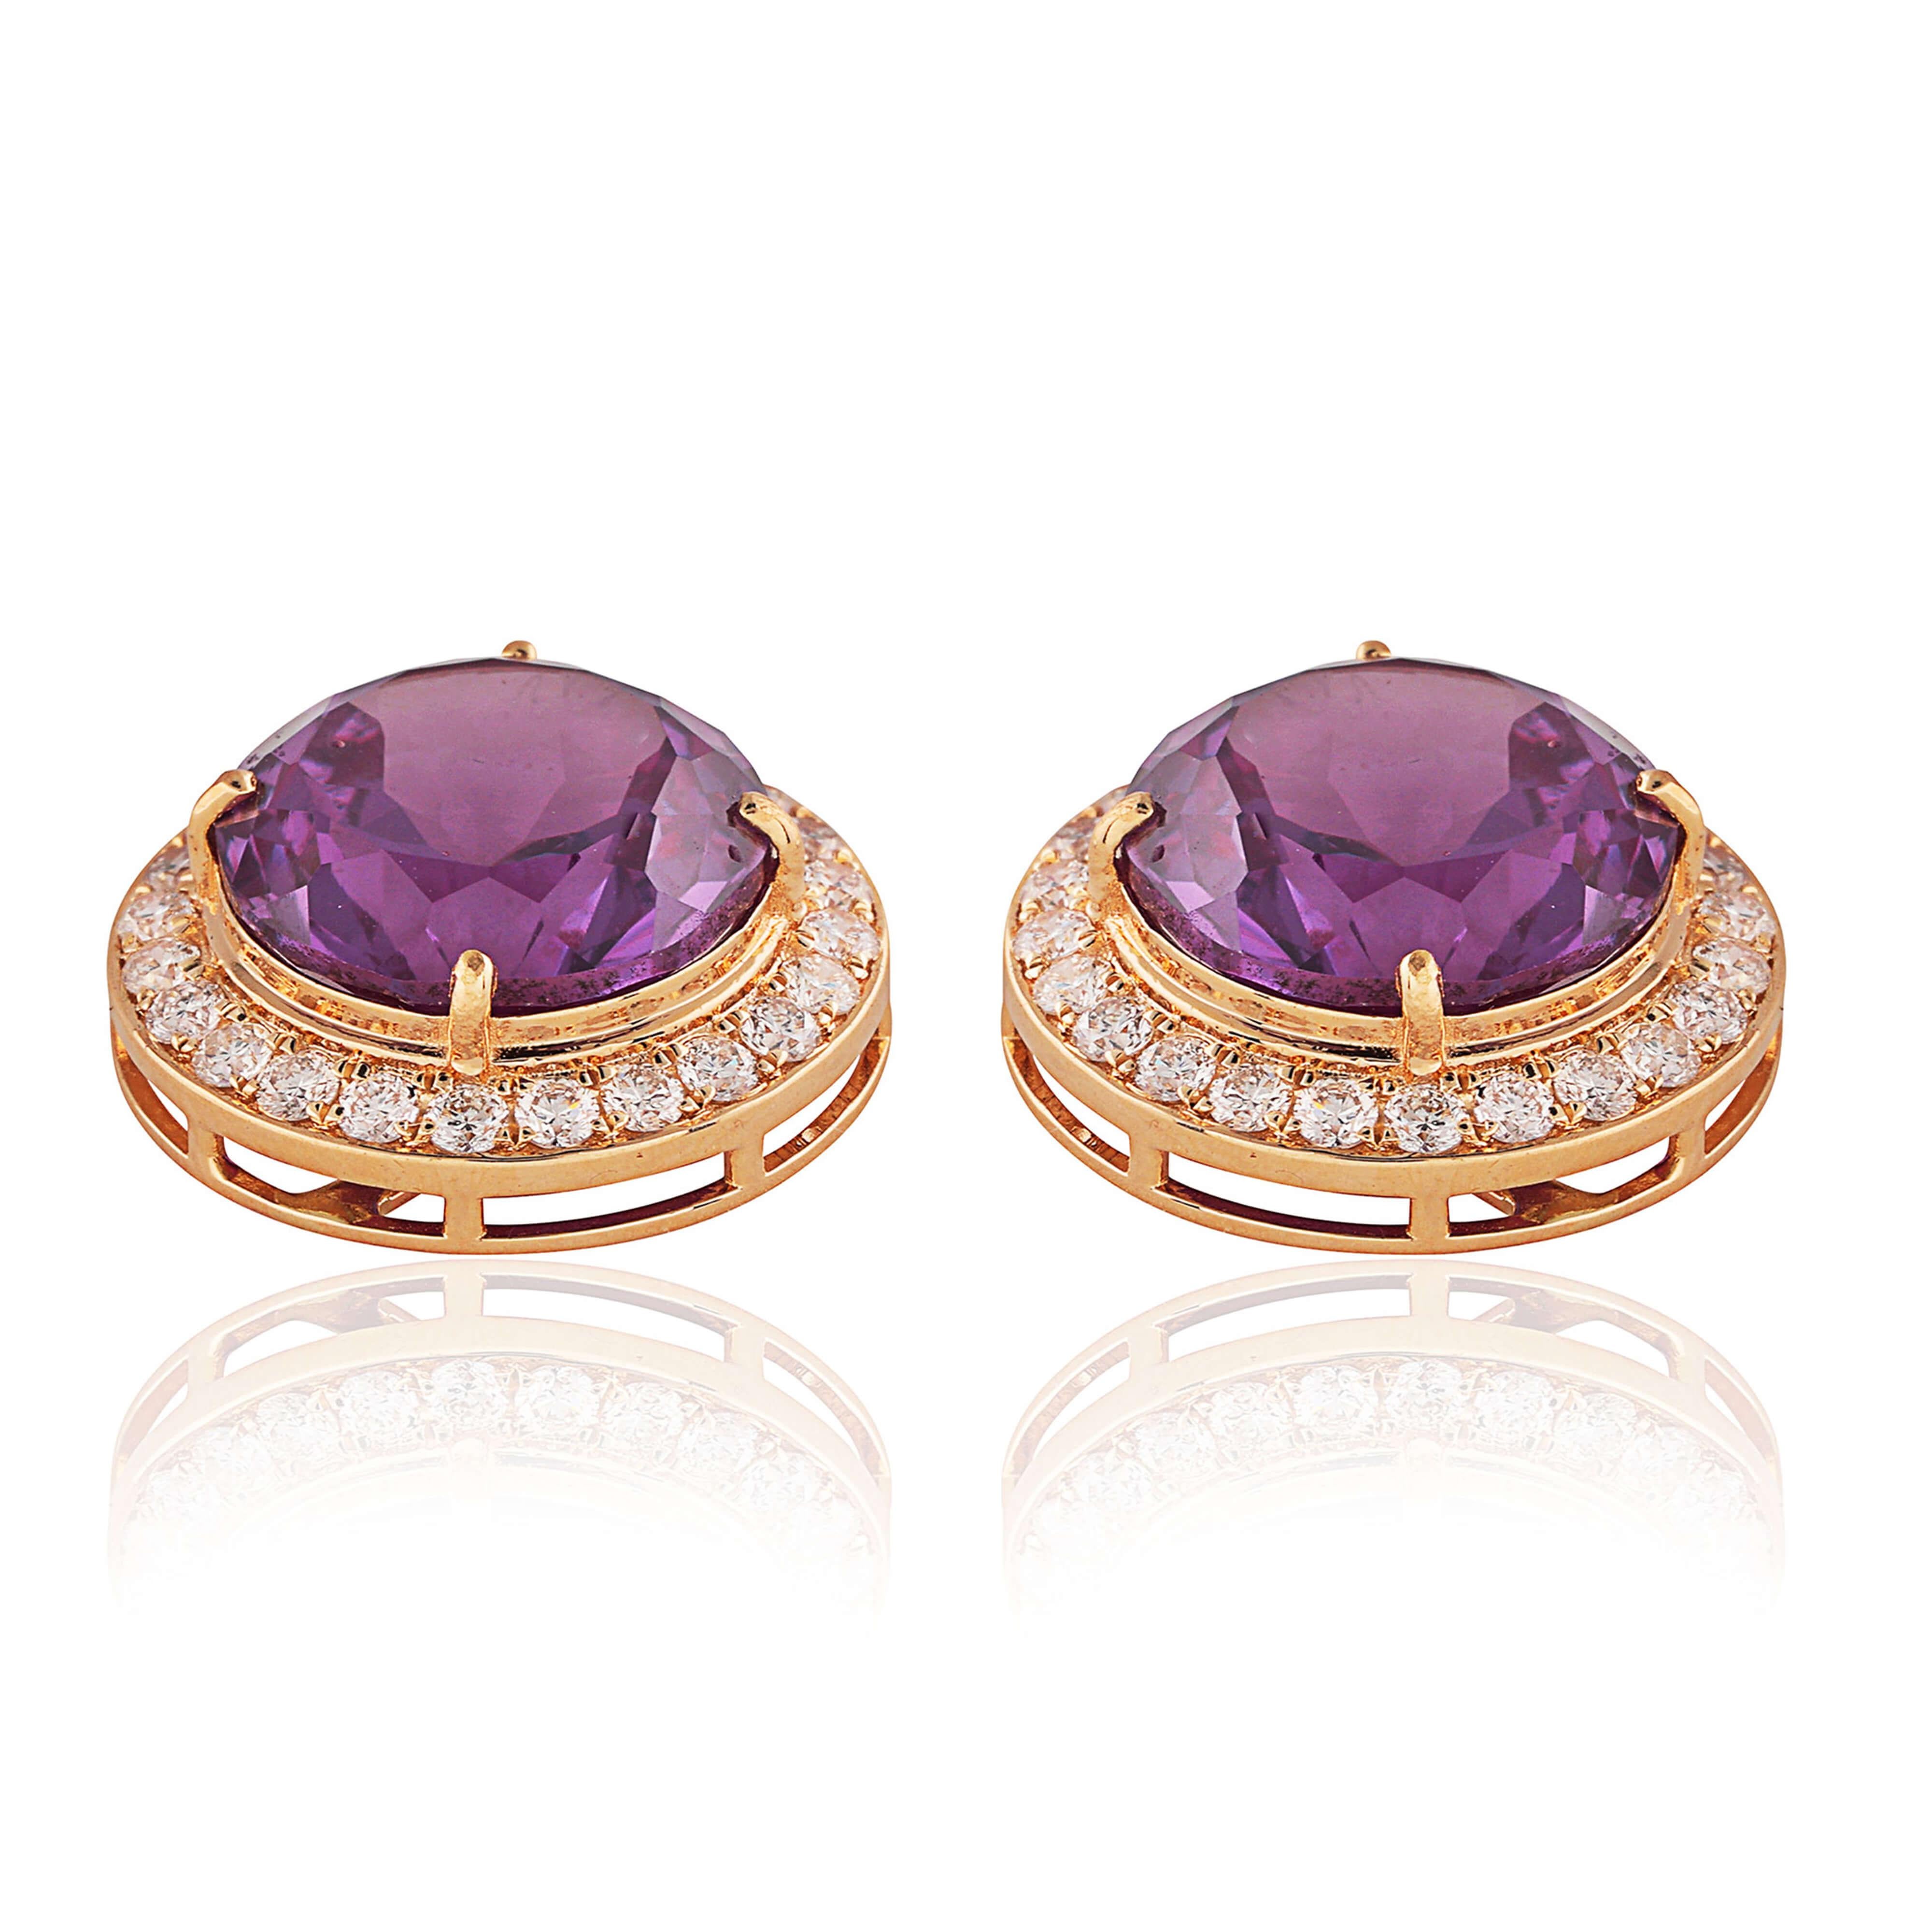 A forever piece of jewellery. A classic, an heirloom. A great (‘can’t go wrong) gift!

Set on 18kt gold with consciously sourced round cut brilliant diamonds and high corundum stones.

4.198 grams 18kt gold; 0.75 carat round brilliant cut diamonds;